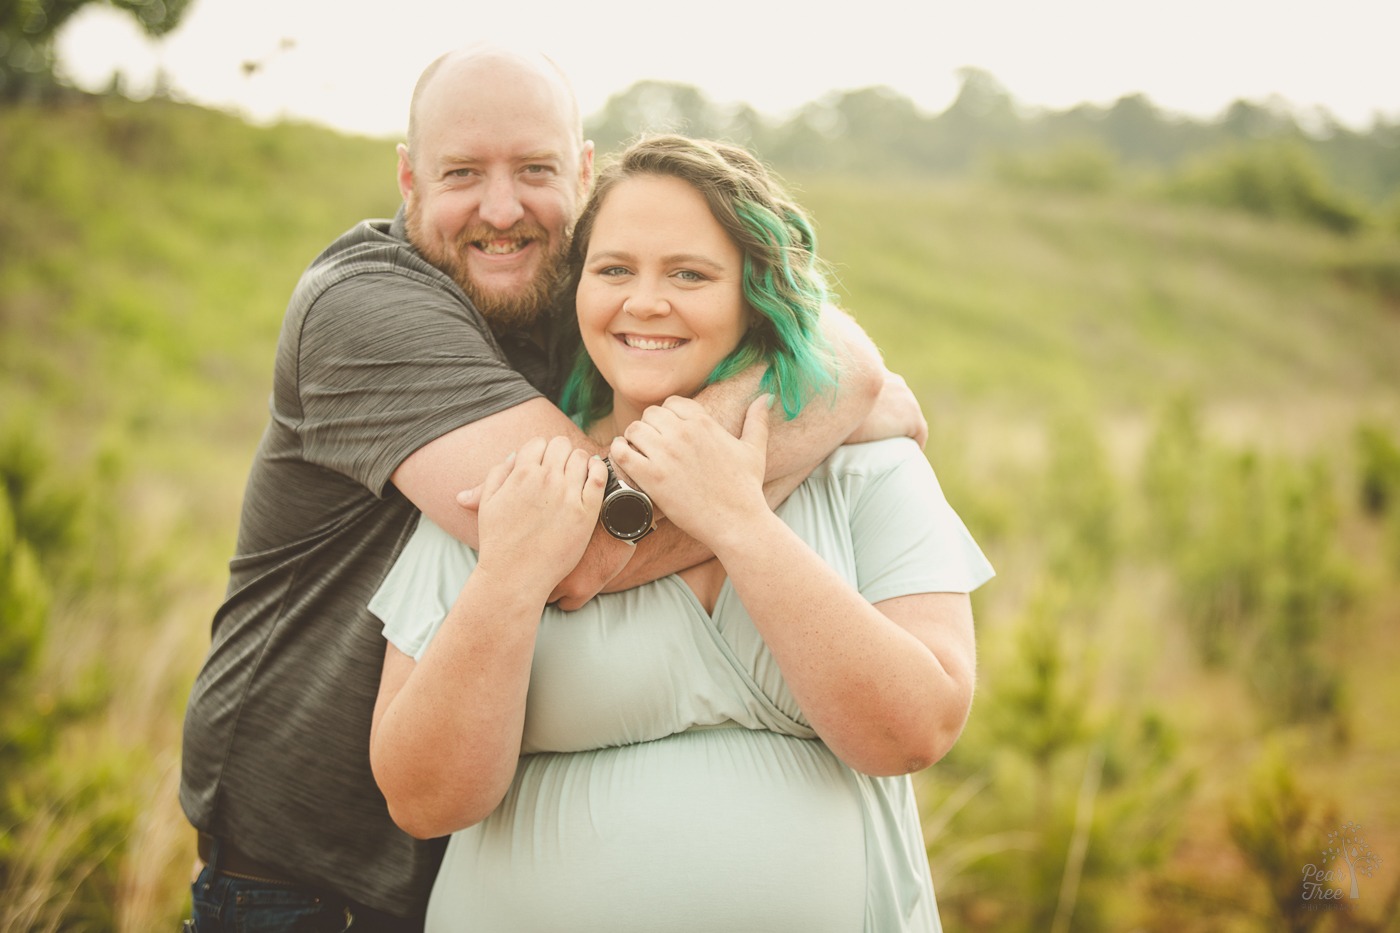 Husband wrapping his arms around his pregnant wife's neck and upper body. Pregnant mom is holding onto her husband's arm and smiling